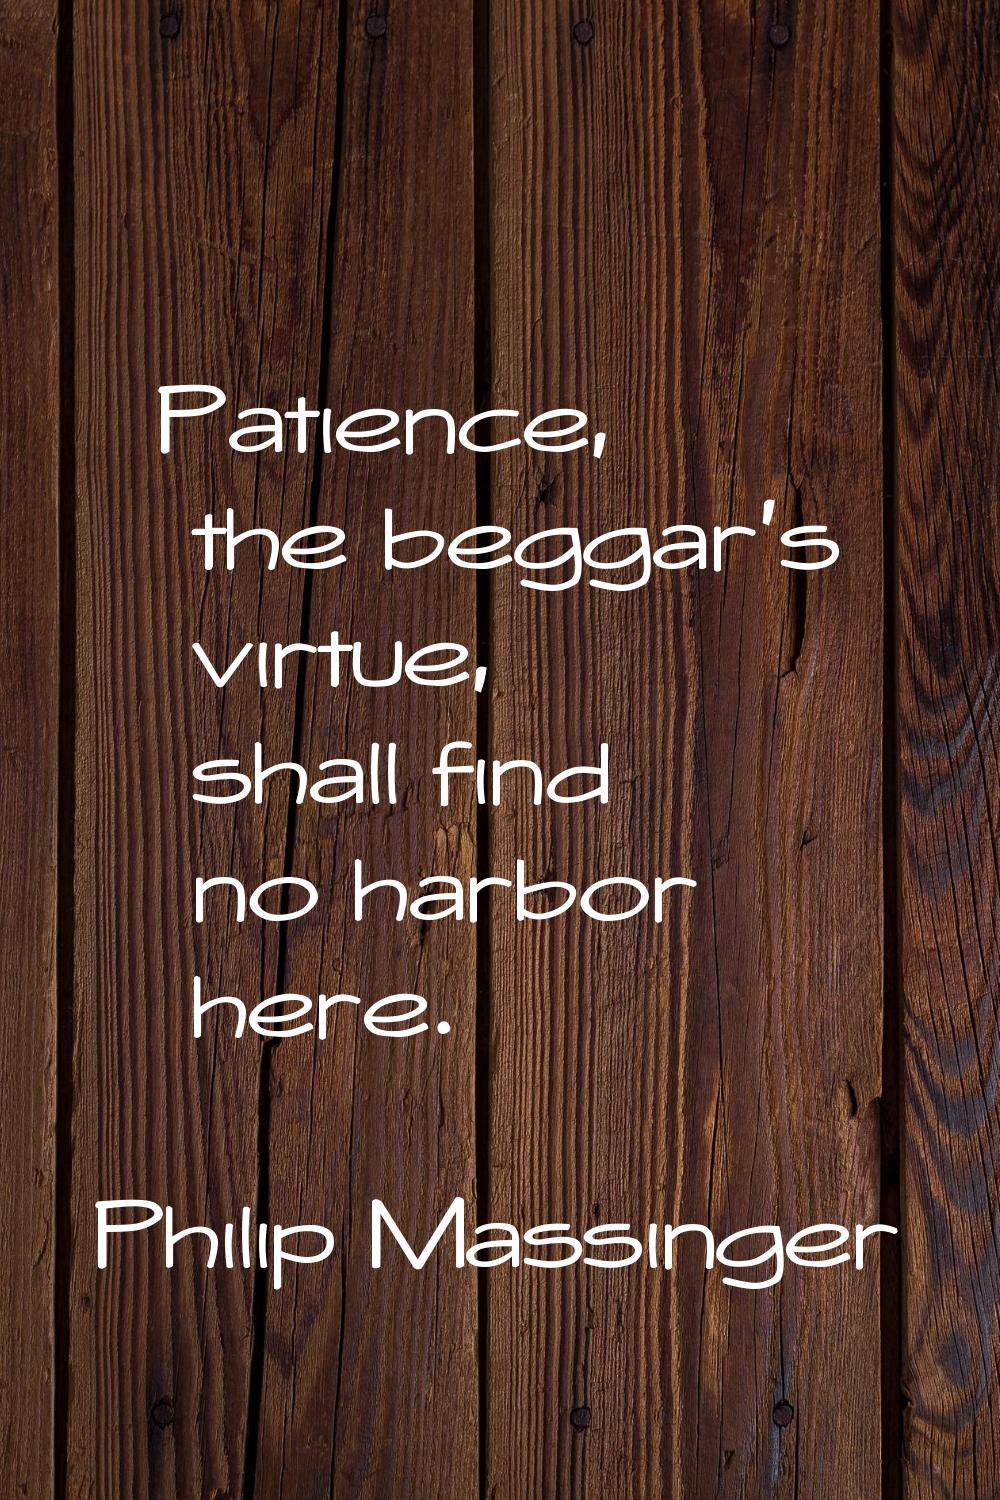 Patience, the beggar's virtue, shall find no harbor here.